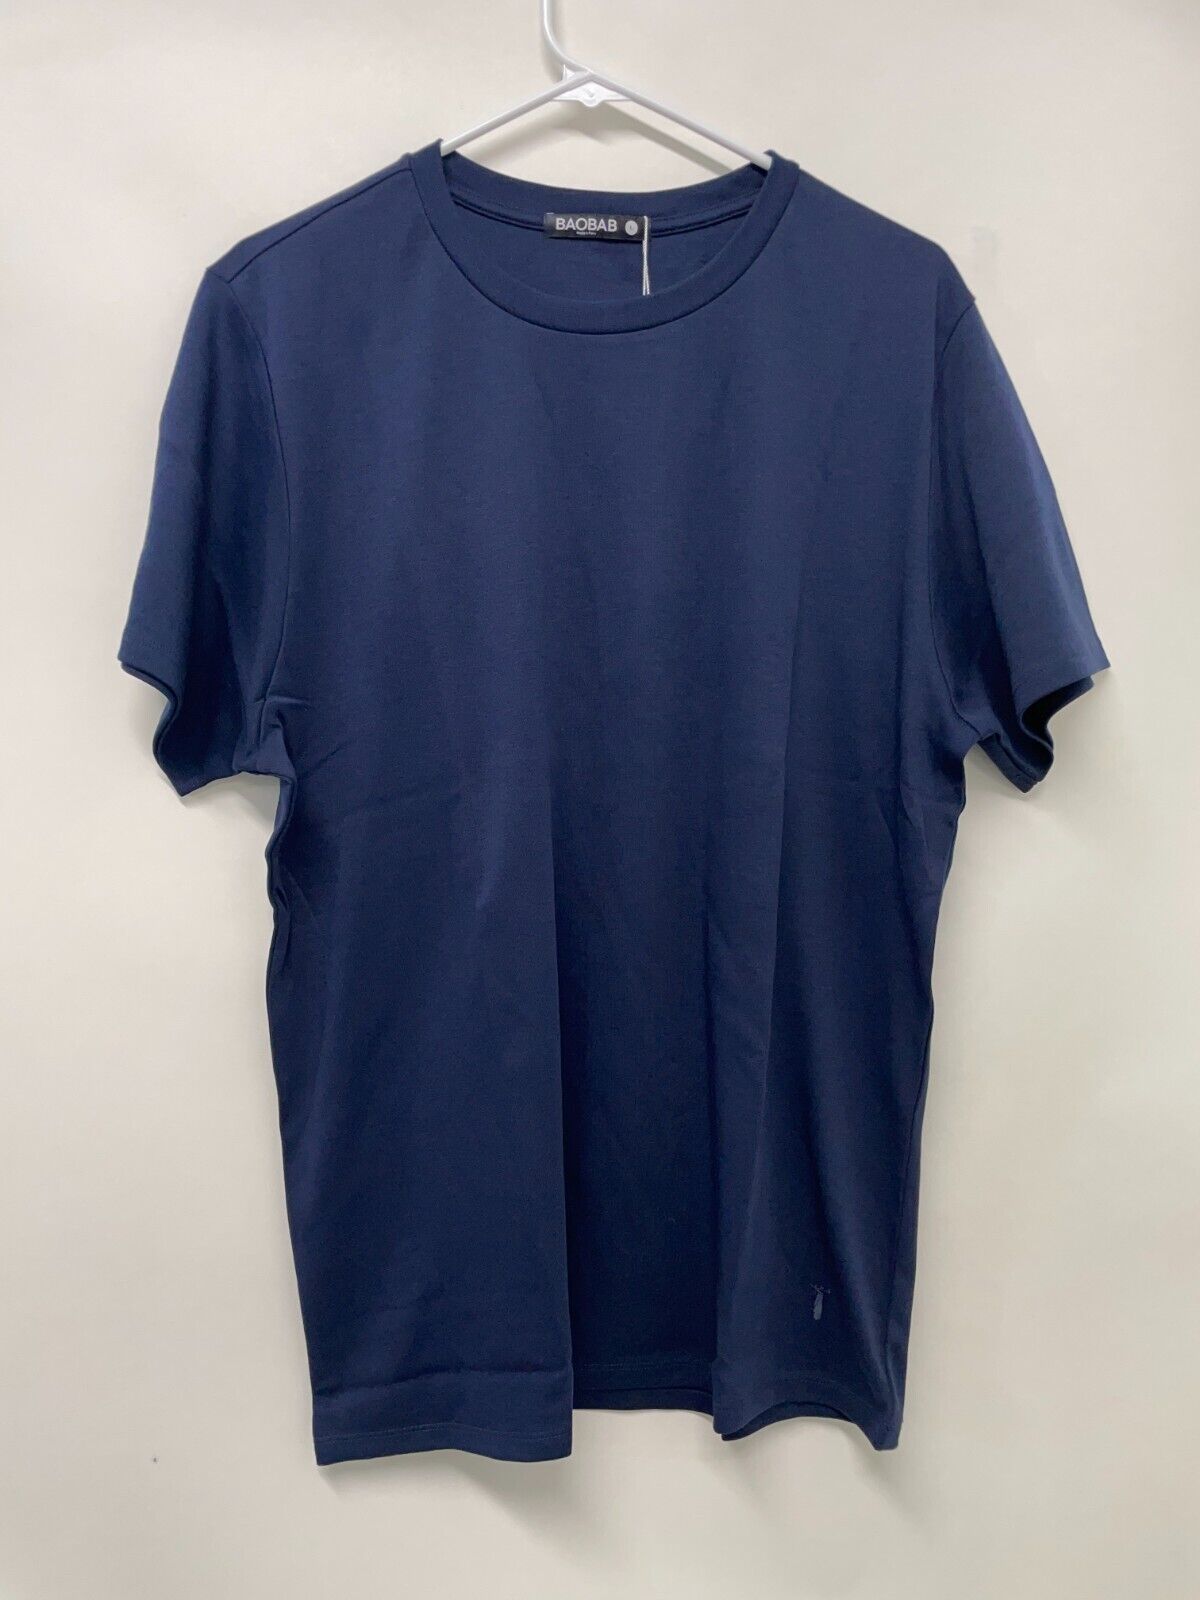 Baobab Men's L The Perfect Tee Short Sleeve Navy 100% Pima Cotton Wicking NEW